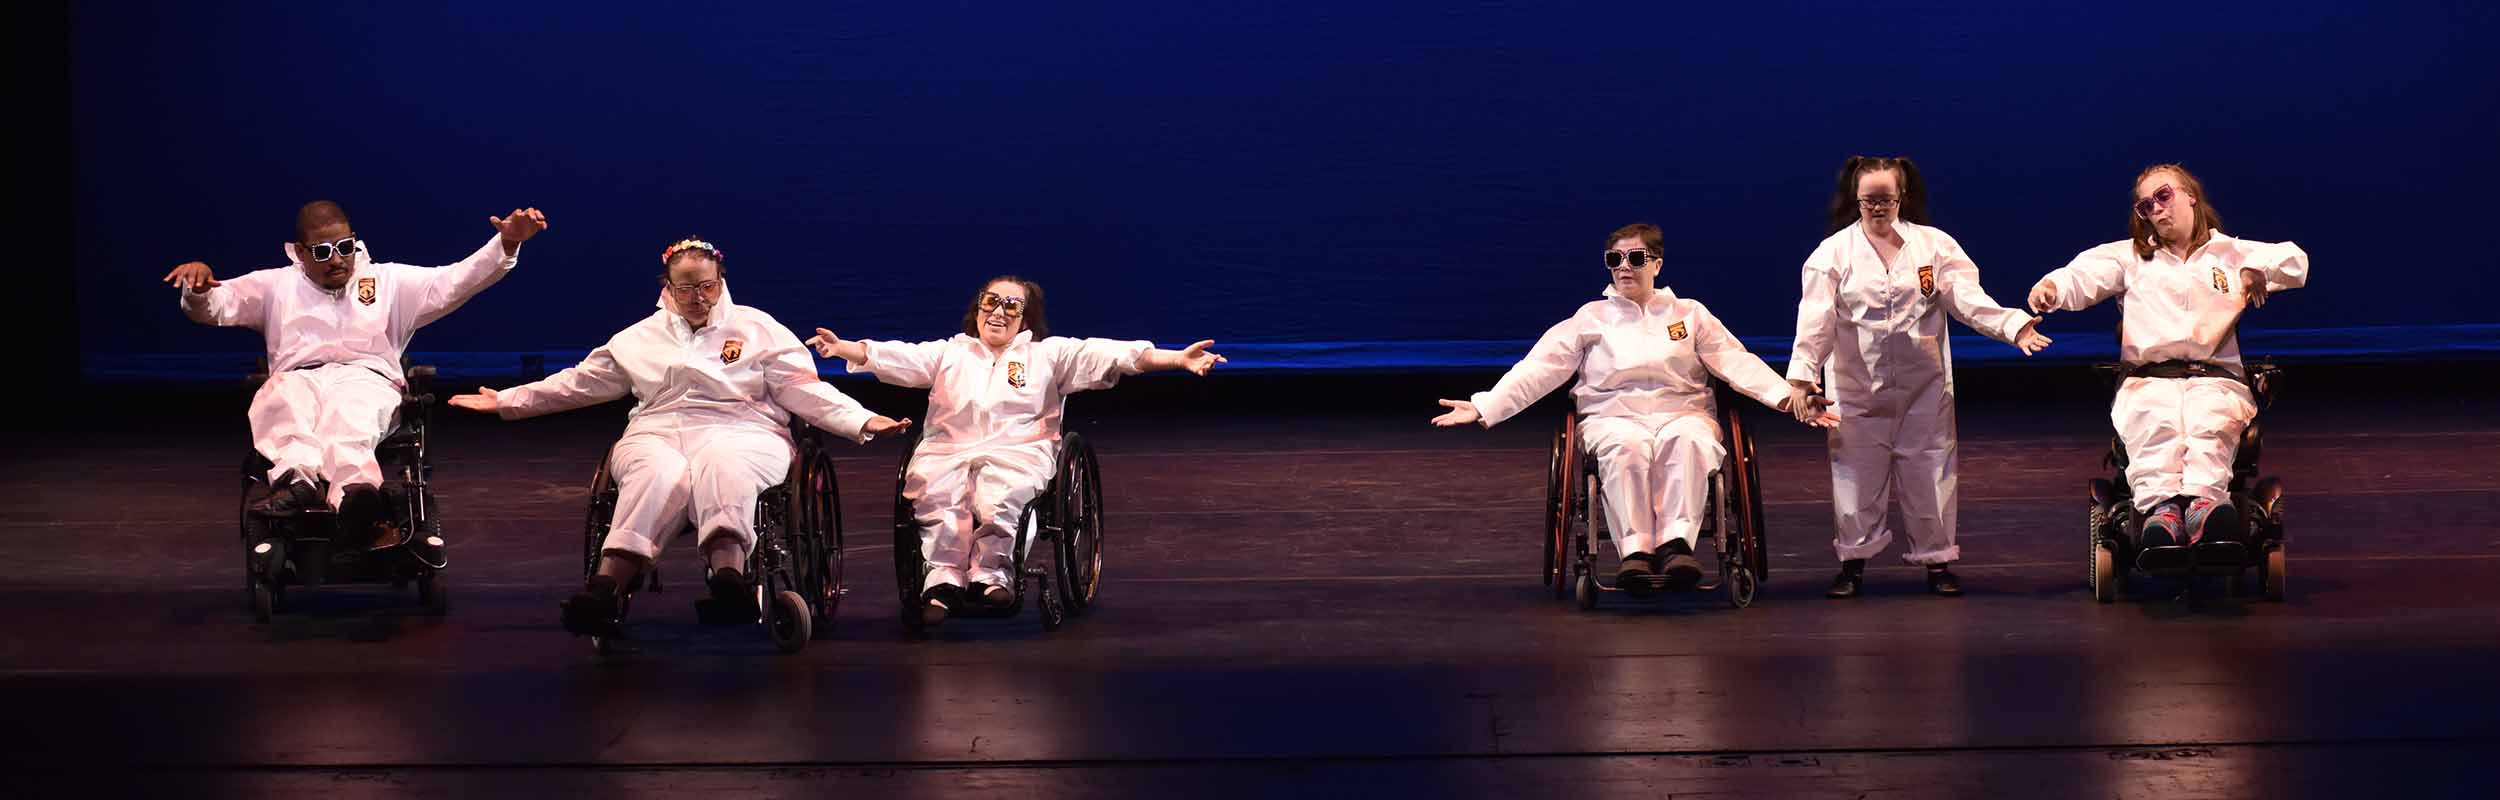 Dancers in the School of Dancing Wheels' Performance Ensemble performing in white astronaut-looking costumes and rainbow dazzled sunglasses